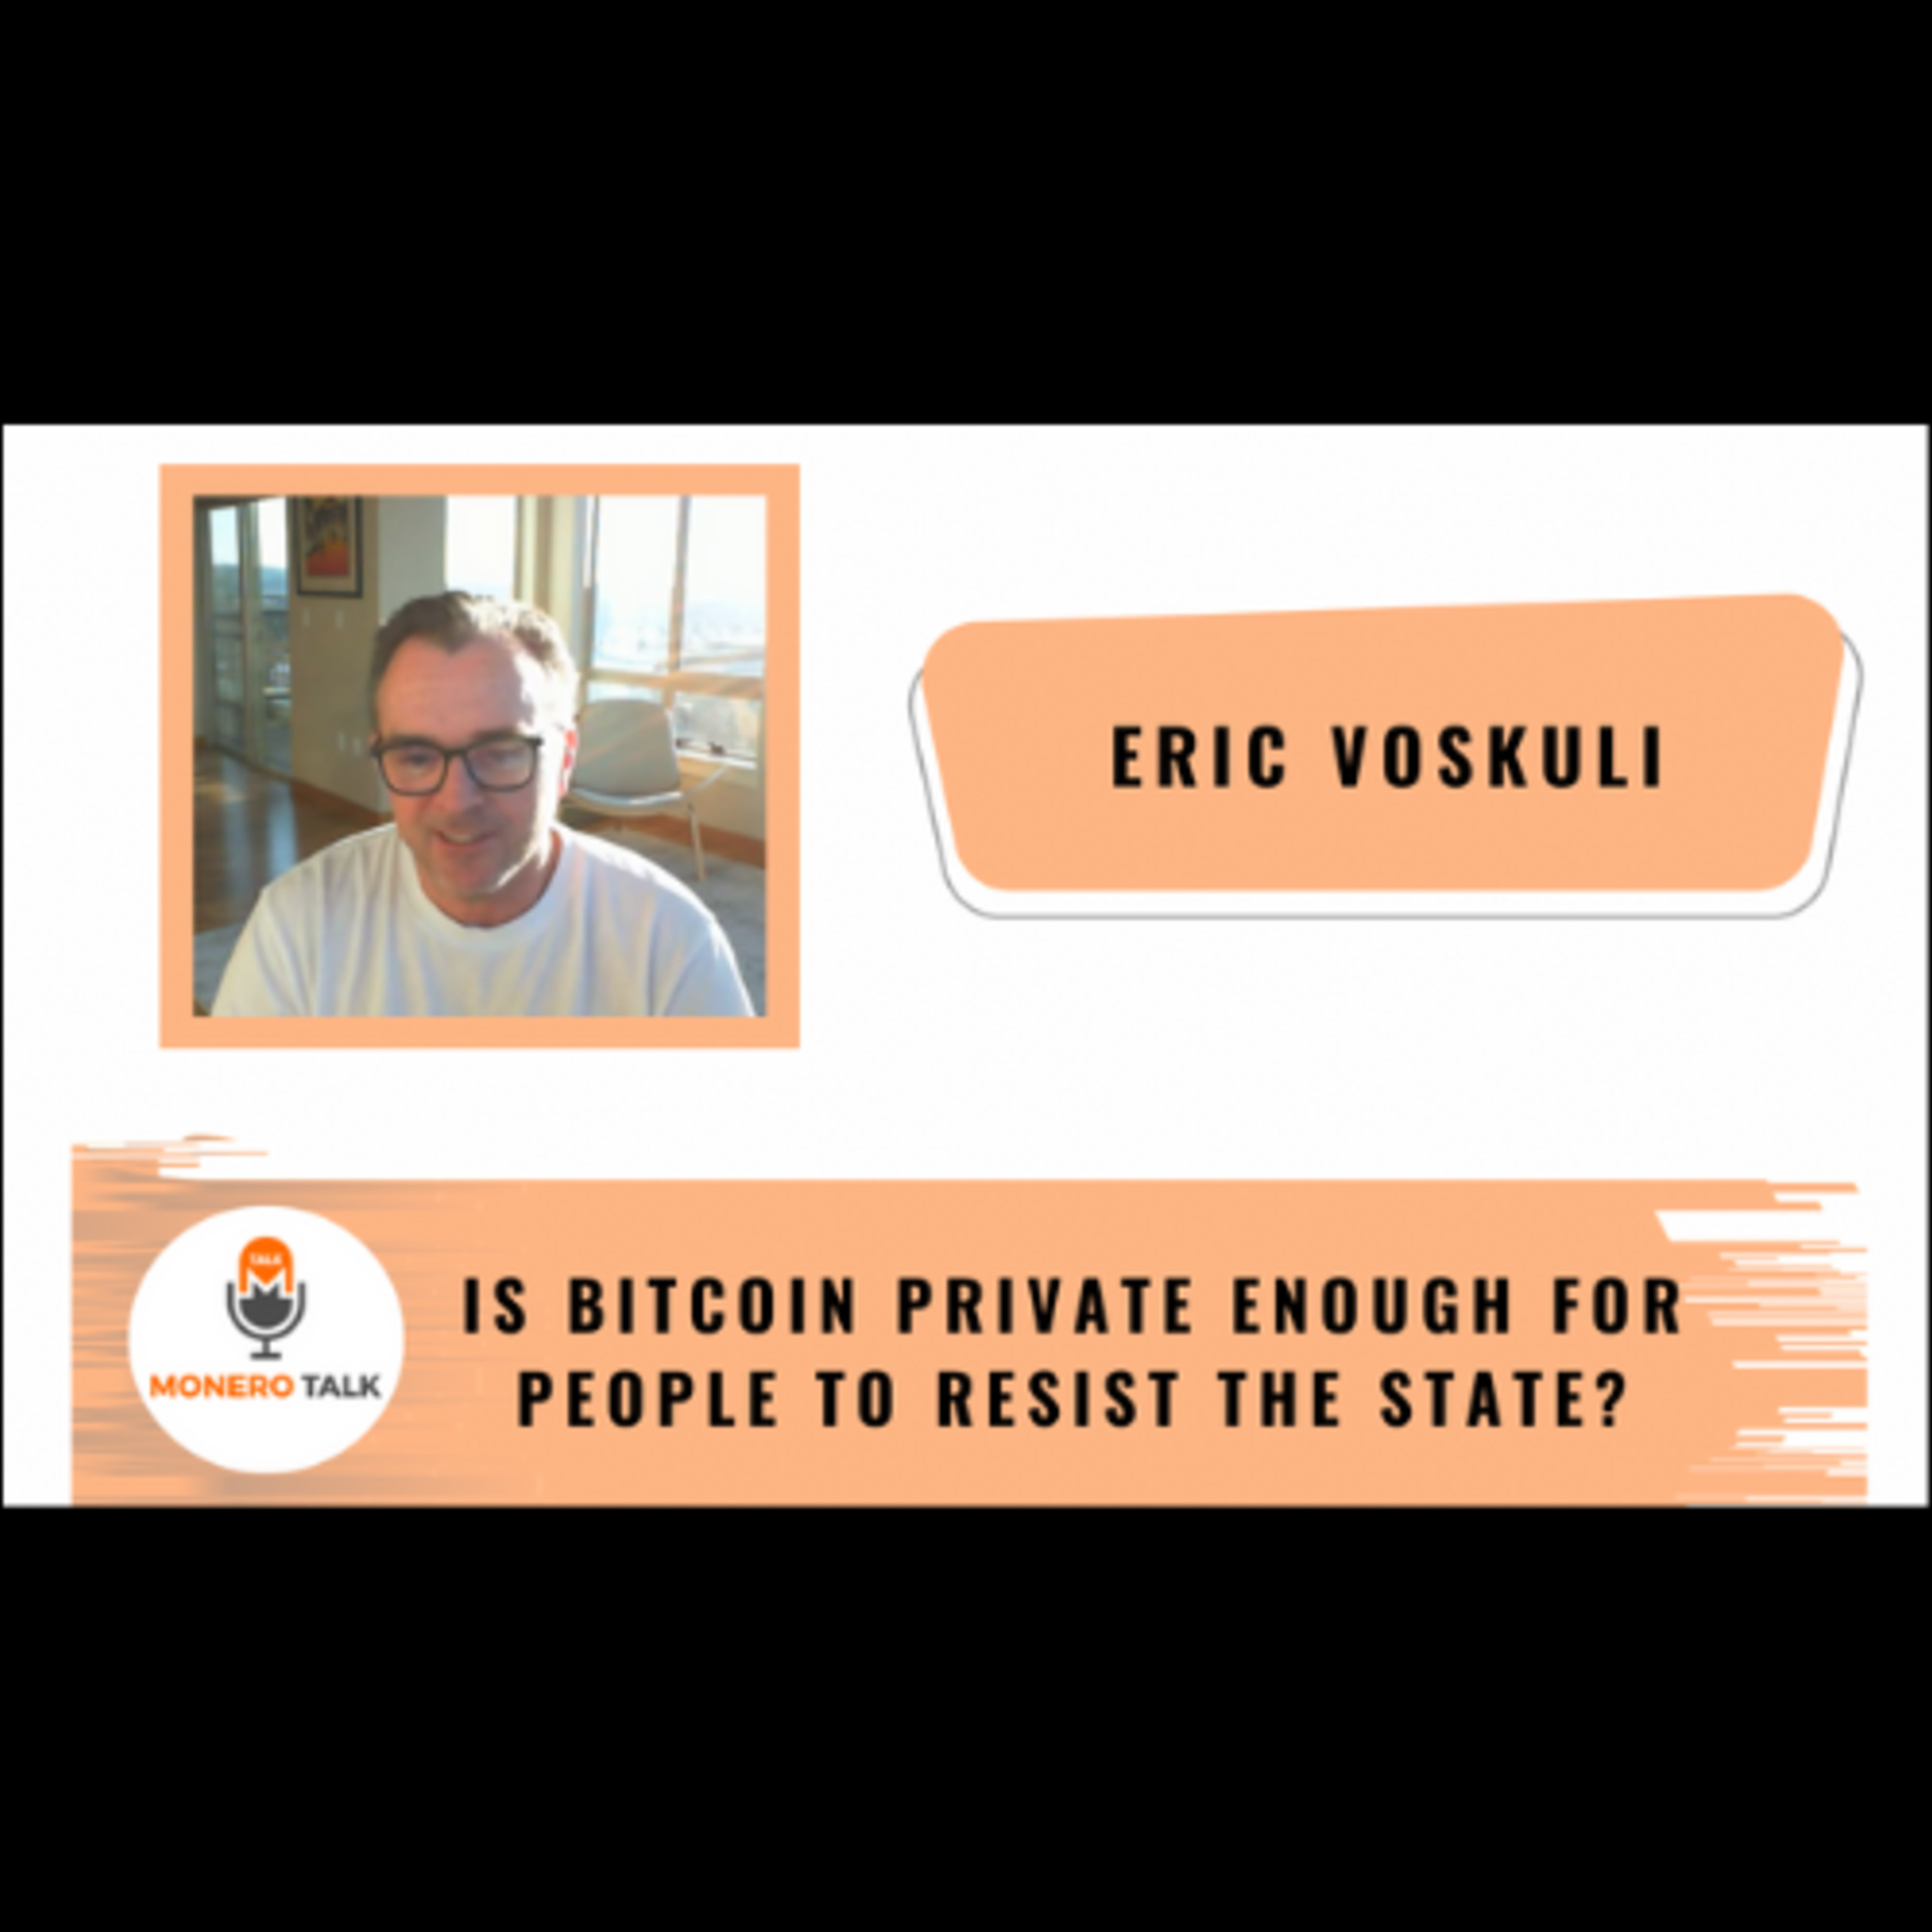 Is Bitcoin Private enough for people to resist the state? - Eric Voskuli